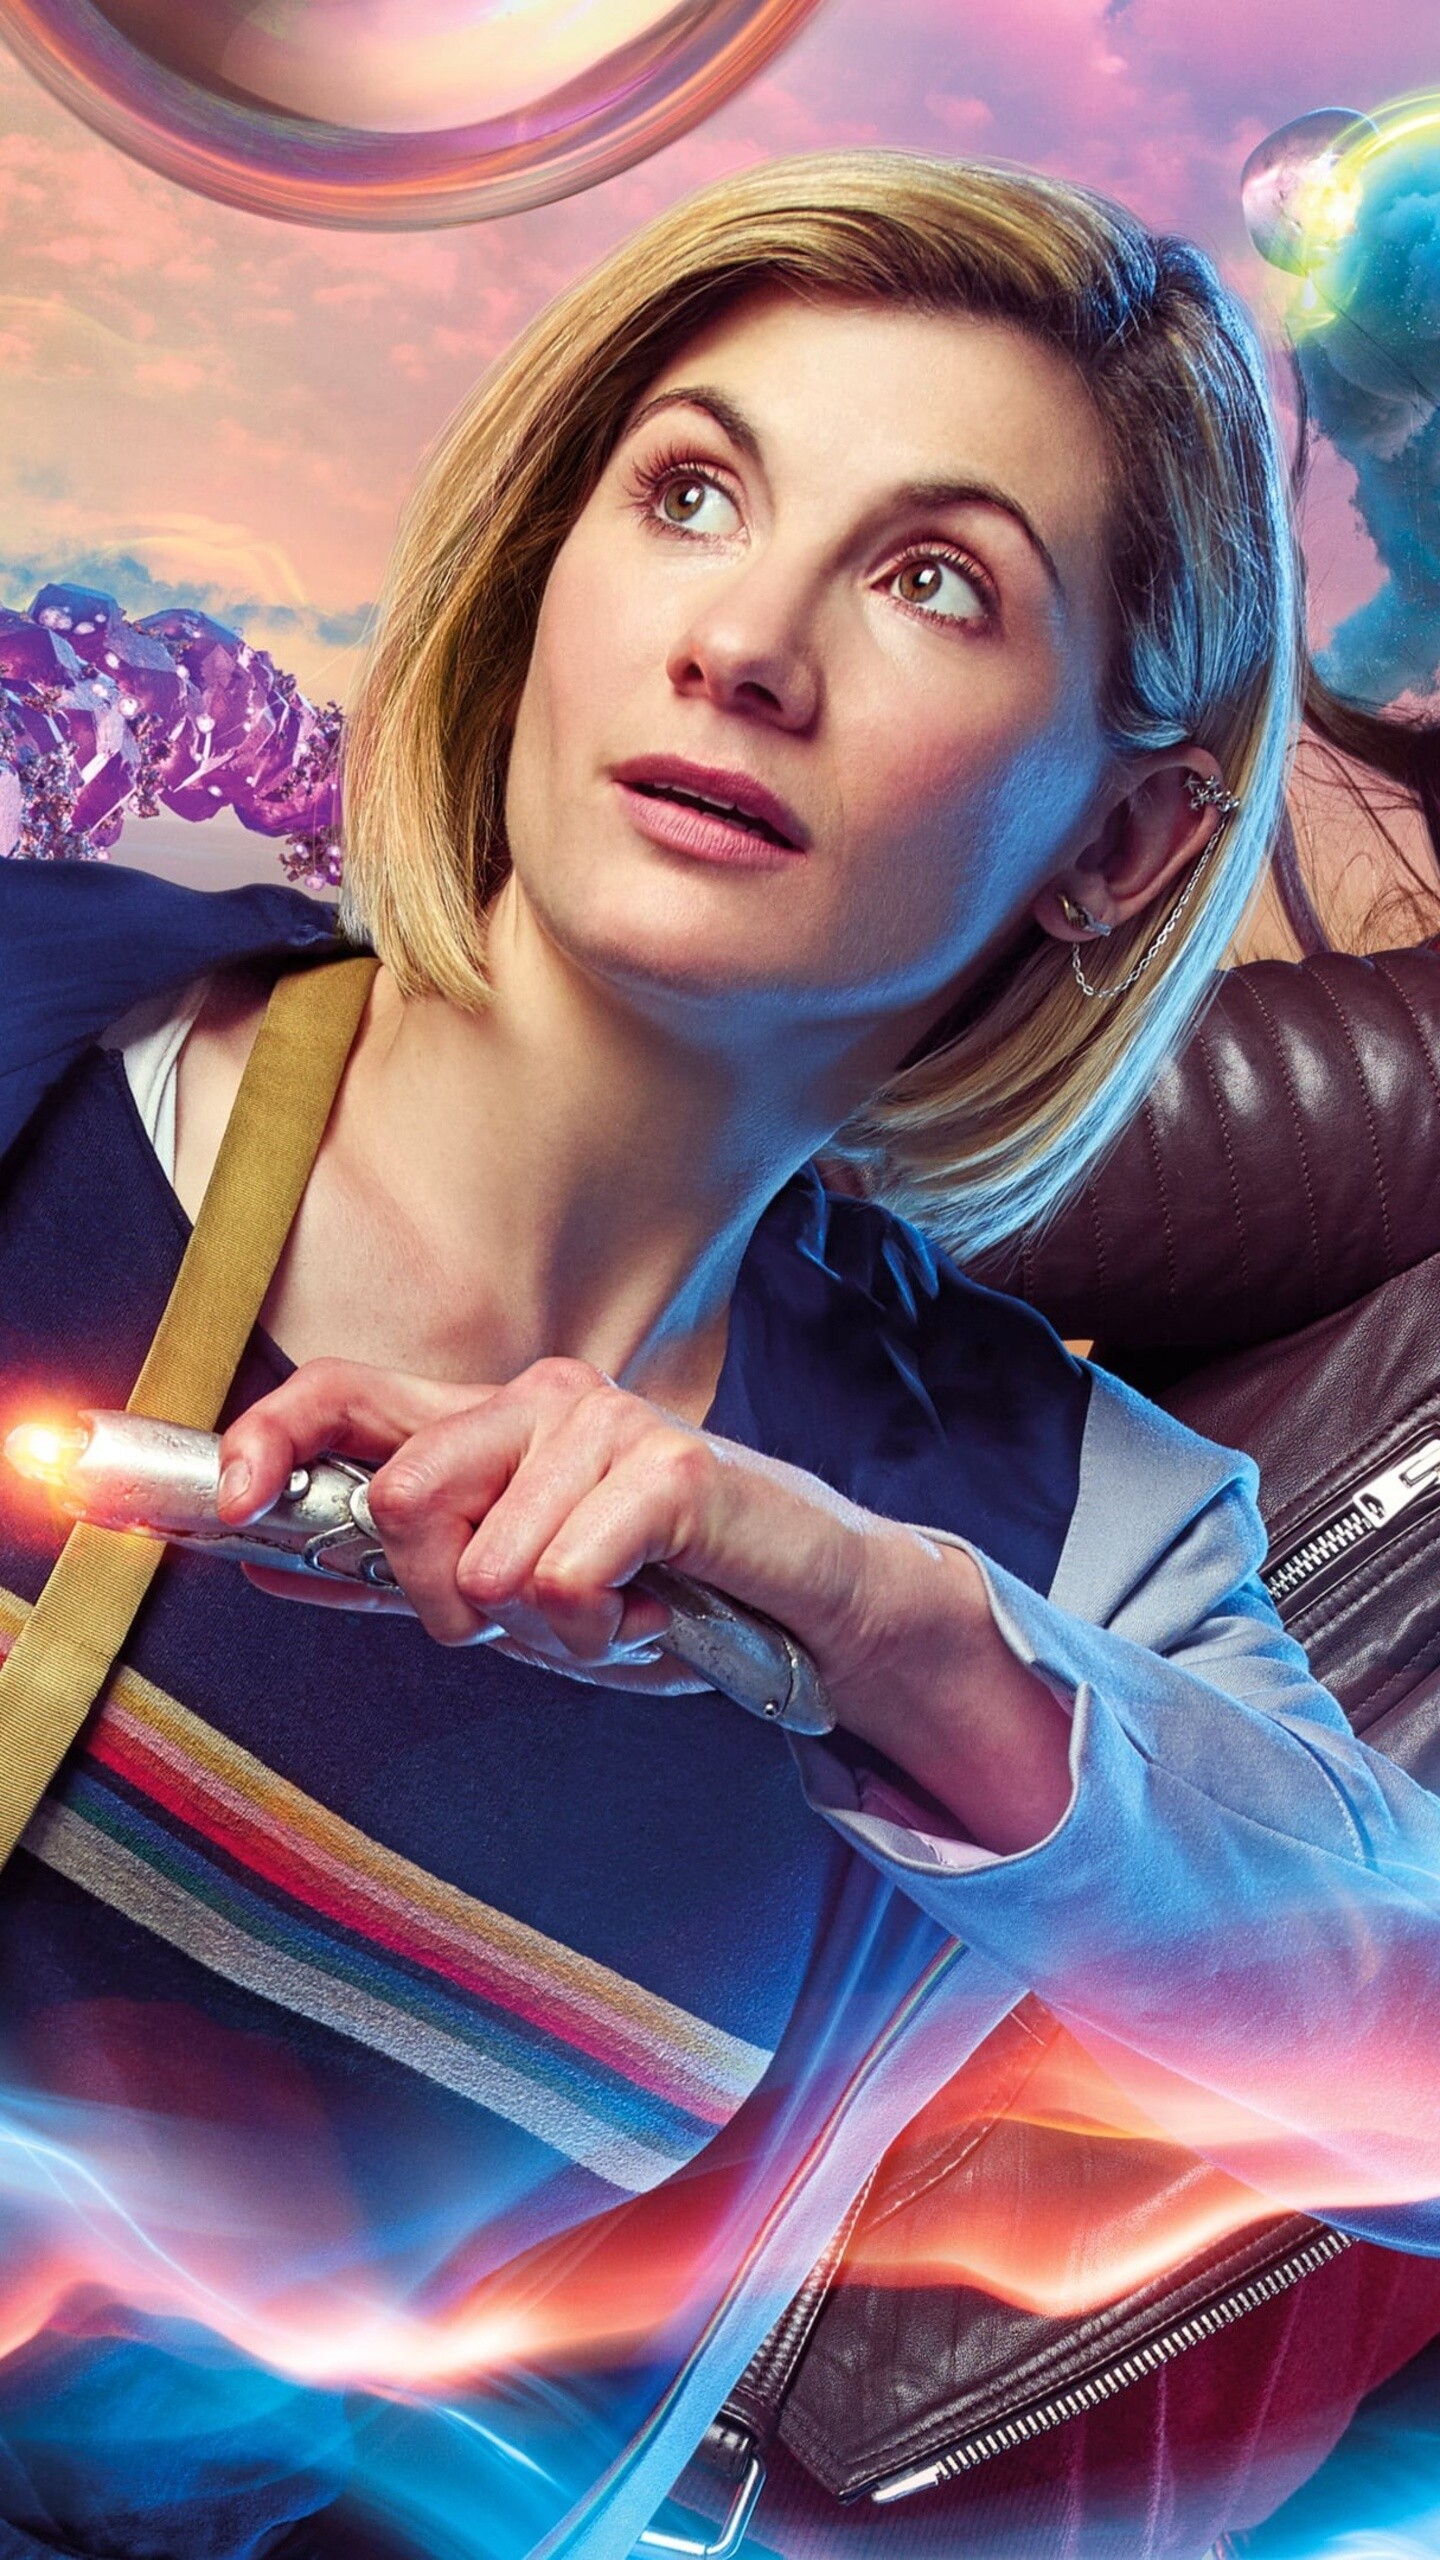 Doctor Who: Series 11, Jodie Whittaker as the Thirteenth Doctor. 1440x2560 HD Background.